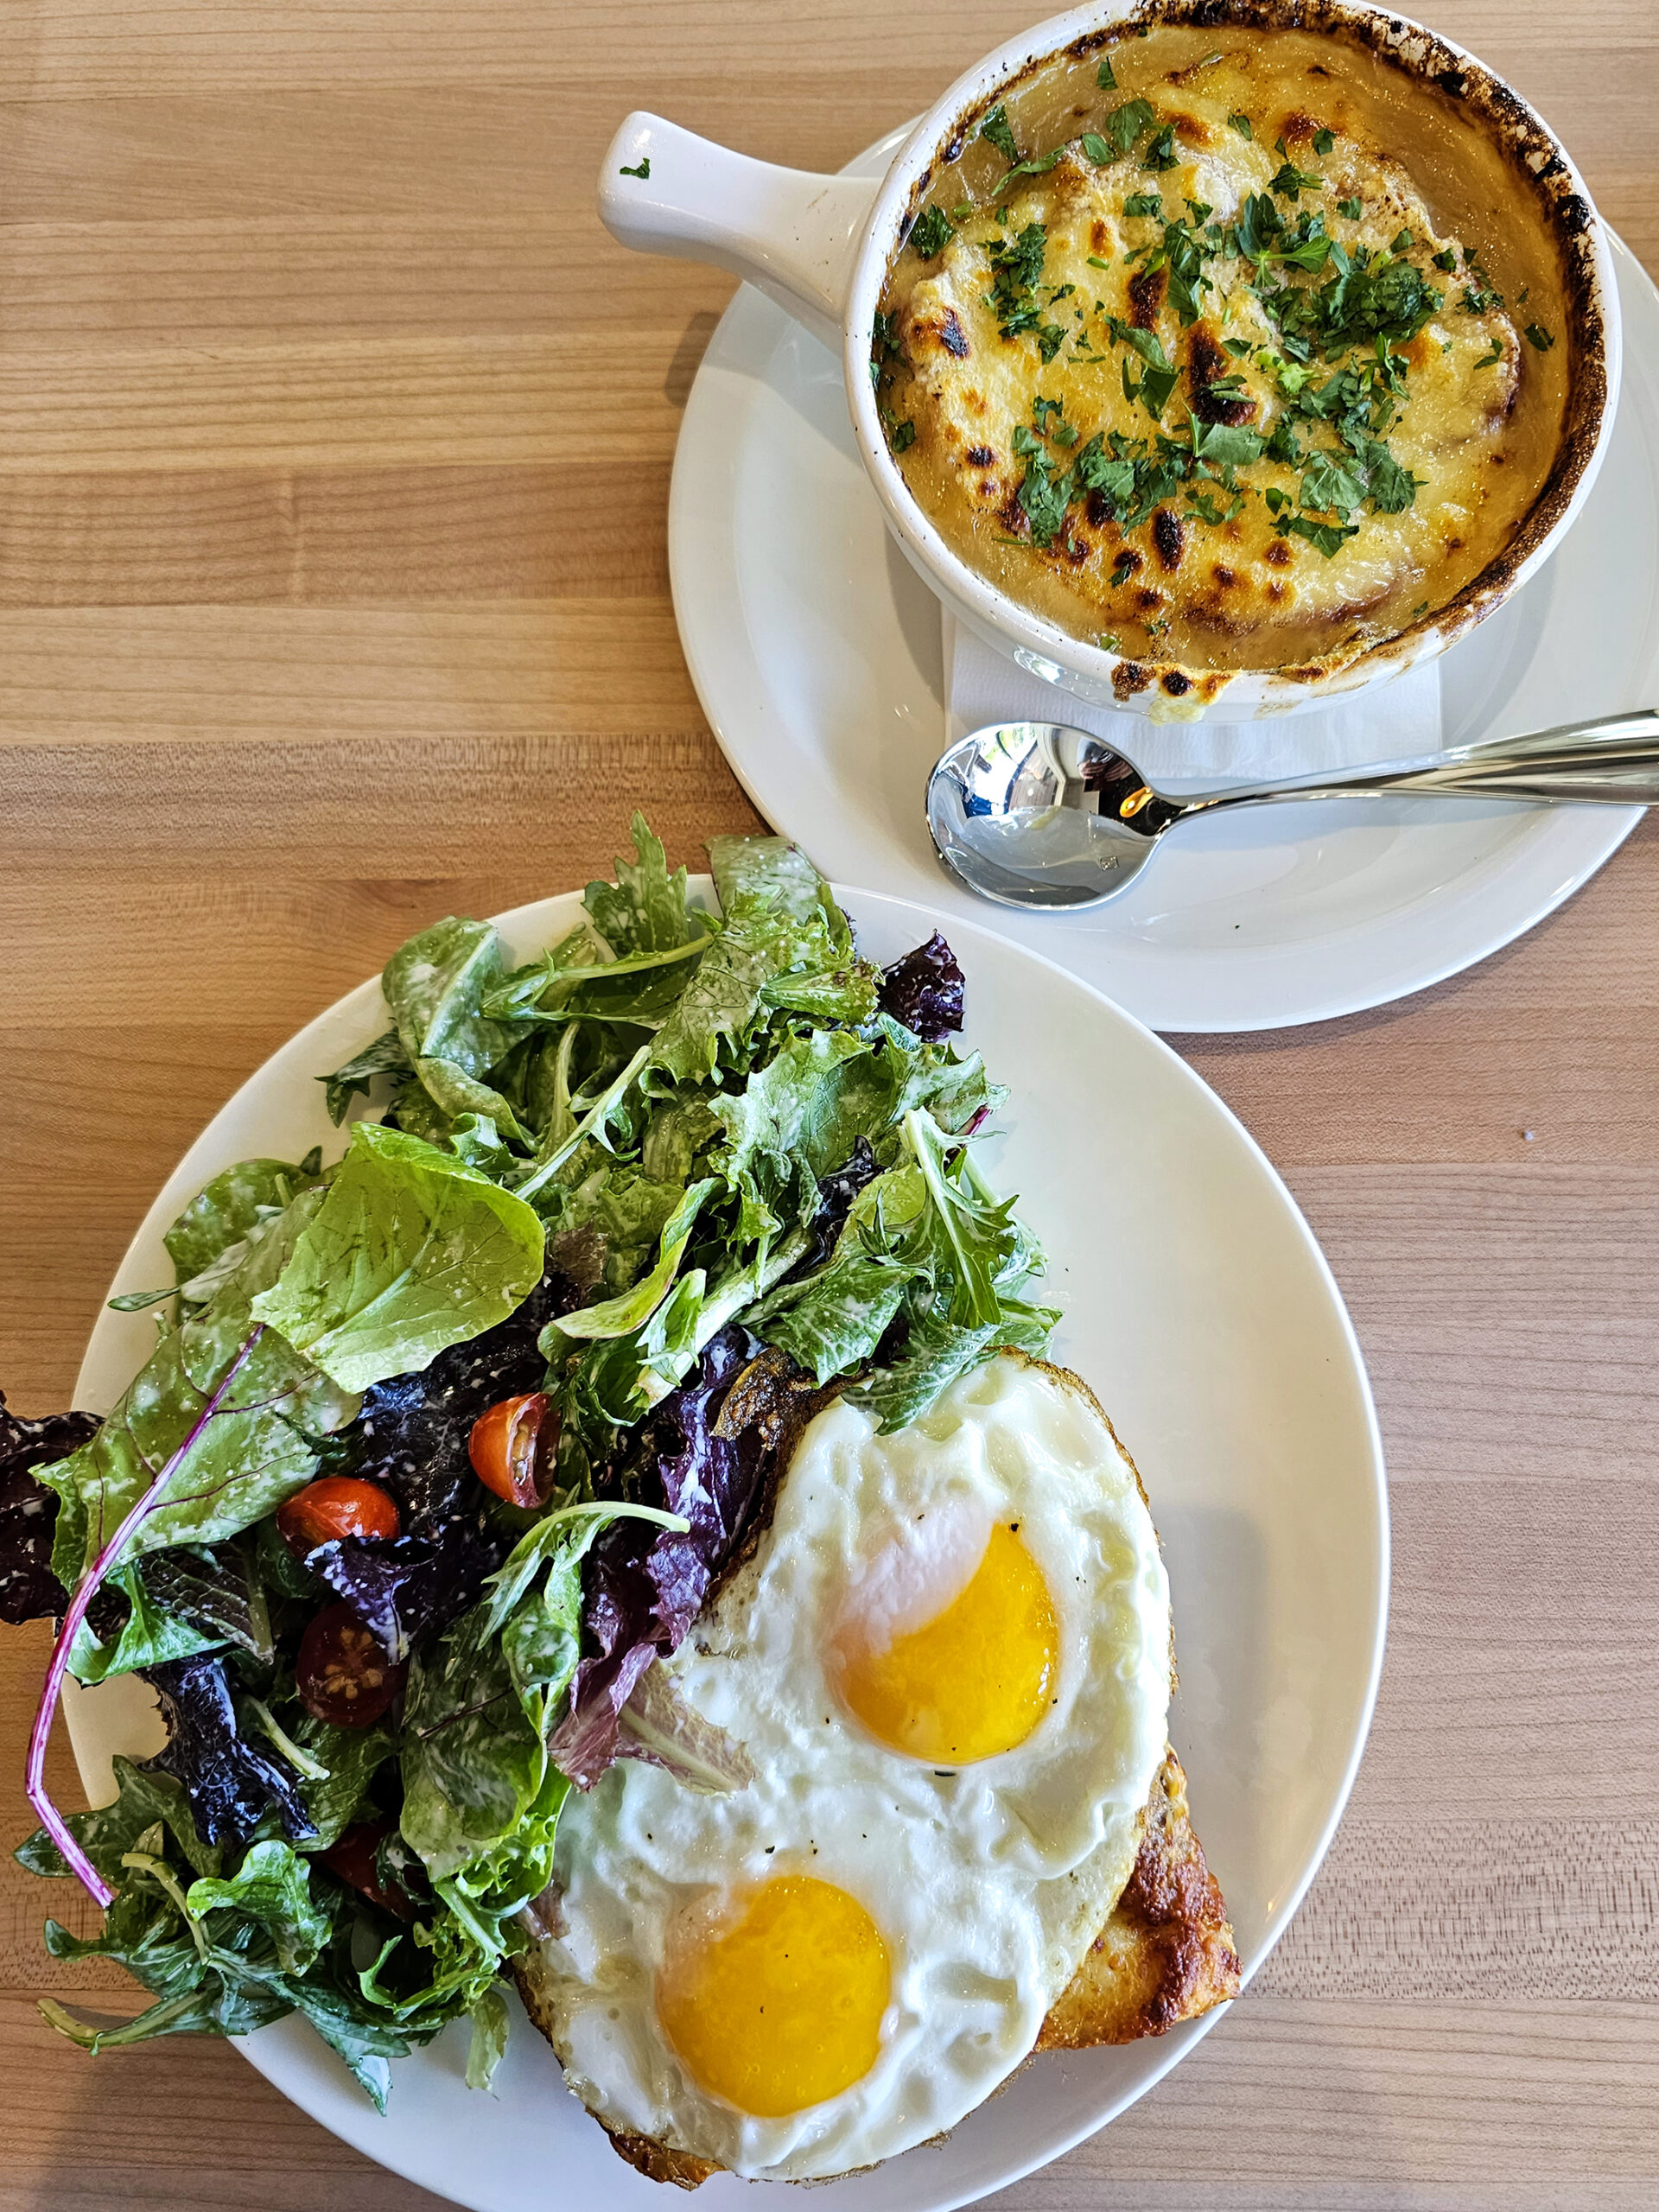 French onion soup and a croque-monsieur at Pascaline Bakery and Cafe in Santa Rosa. (Heather Irwin/The Press Democrat)